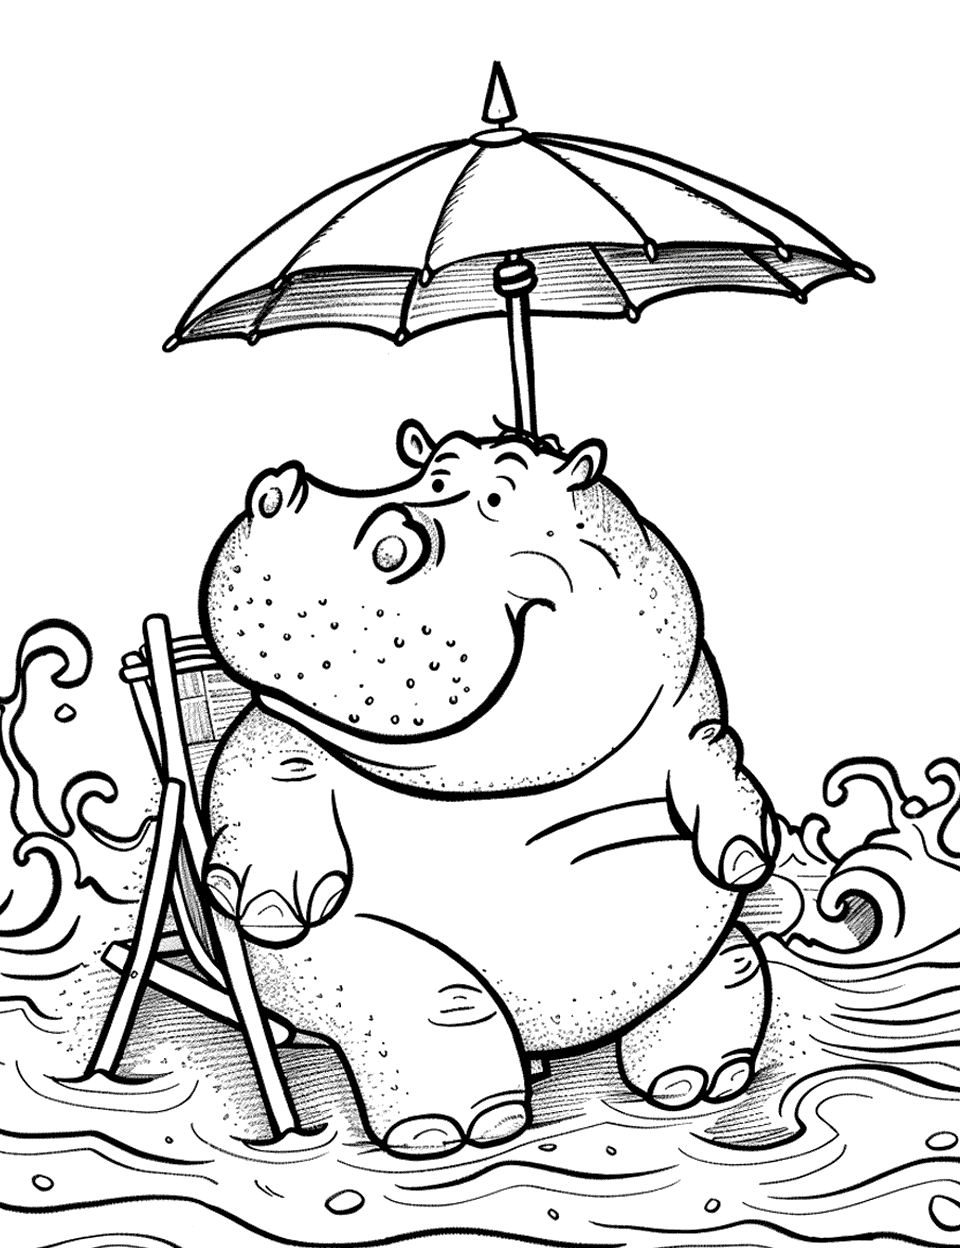 Hippo Beach Vacation Coloring Page - Hippo lounging on beach chair under umbrella with waves crashing nearby.